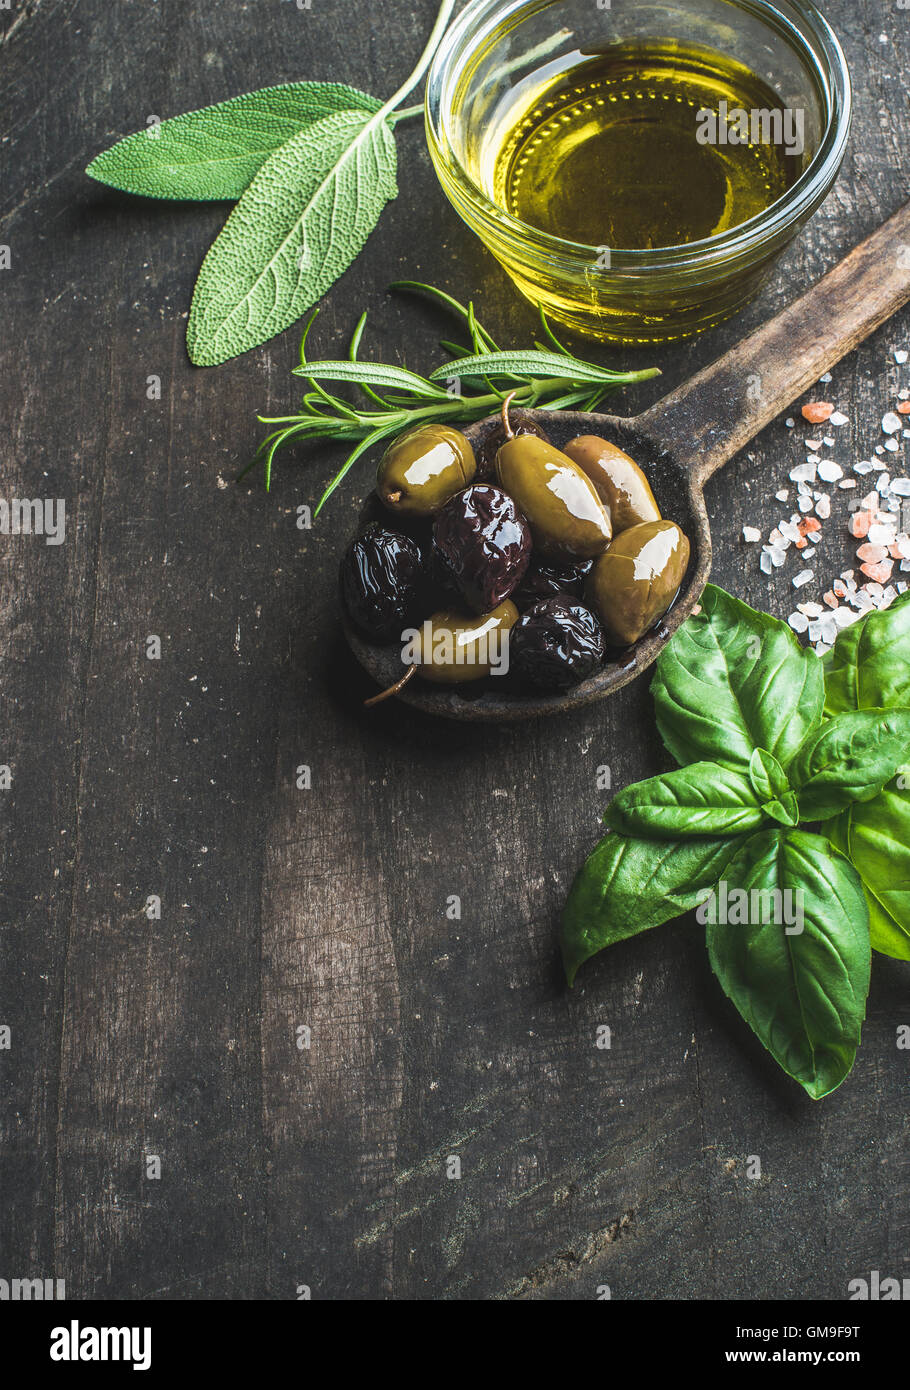 Green and black Mediterranean olives with fresh herbs Stock Photo